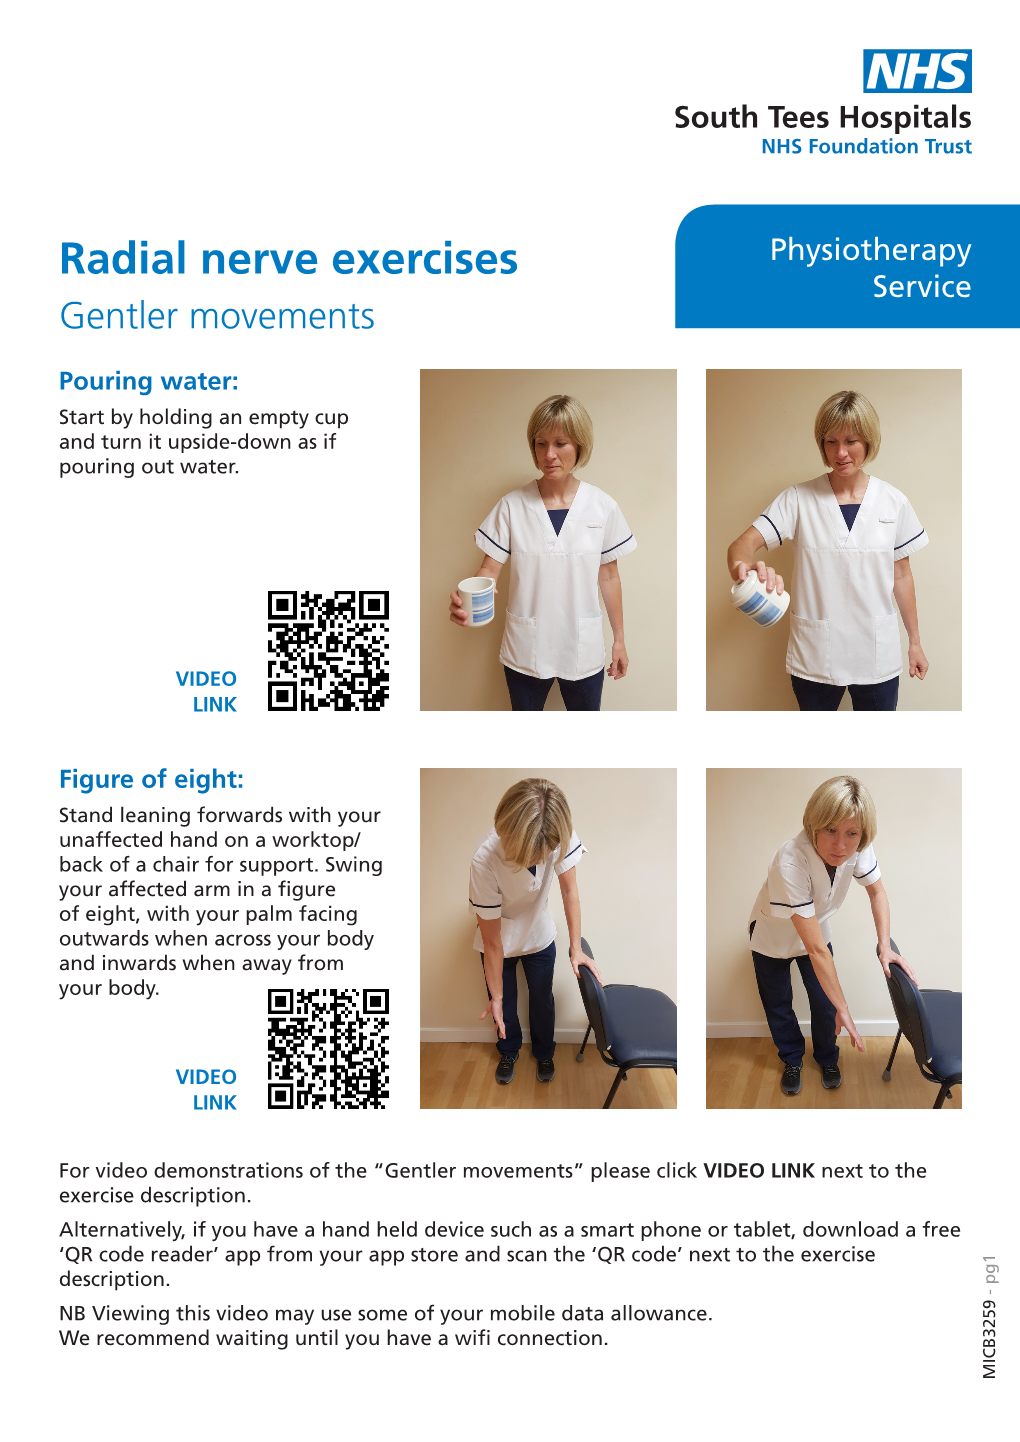 Radial Nerve Exercises Physiotherapy Service Gentler Movements